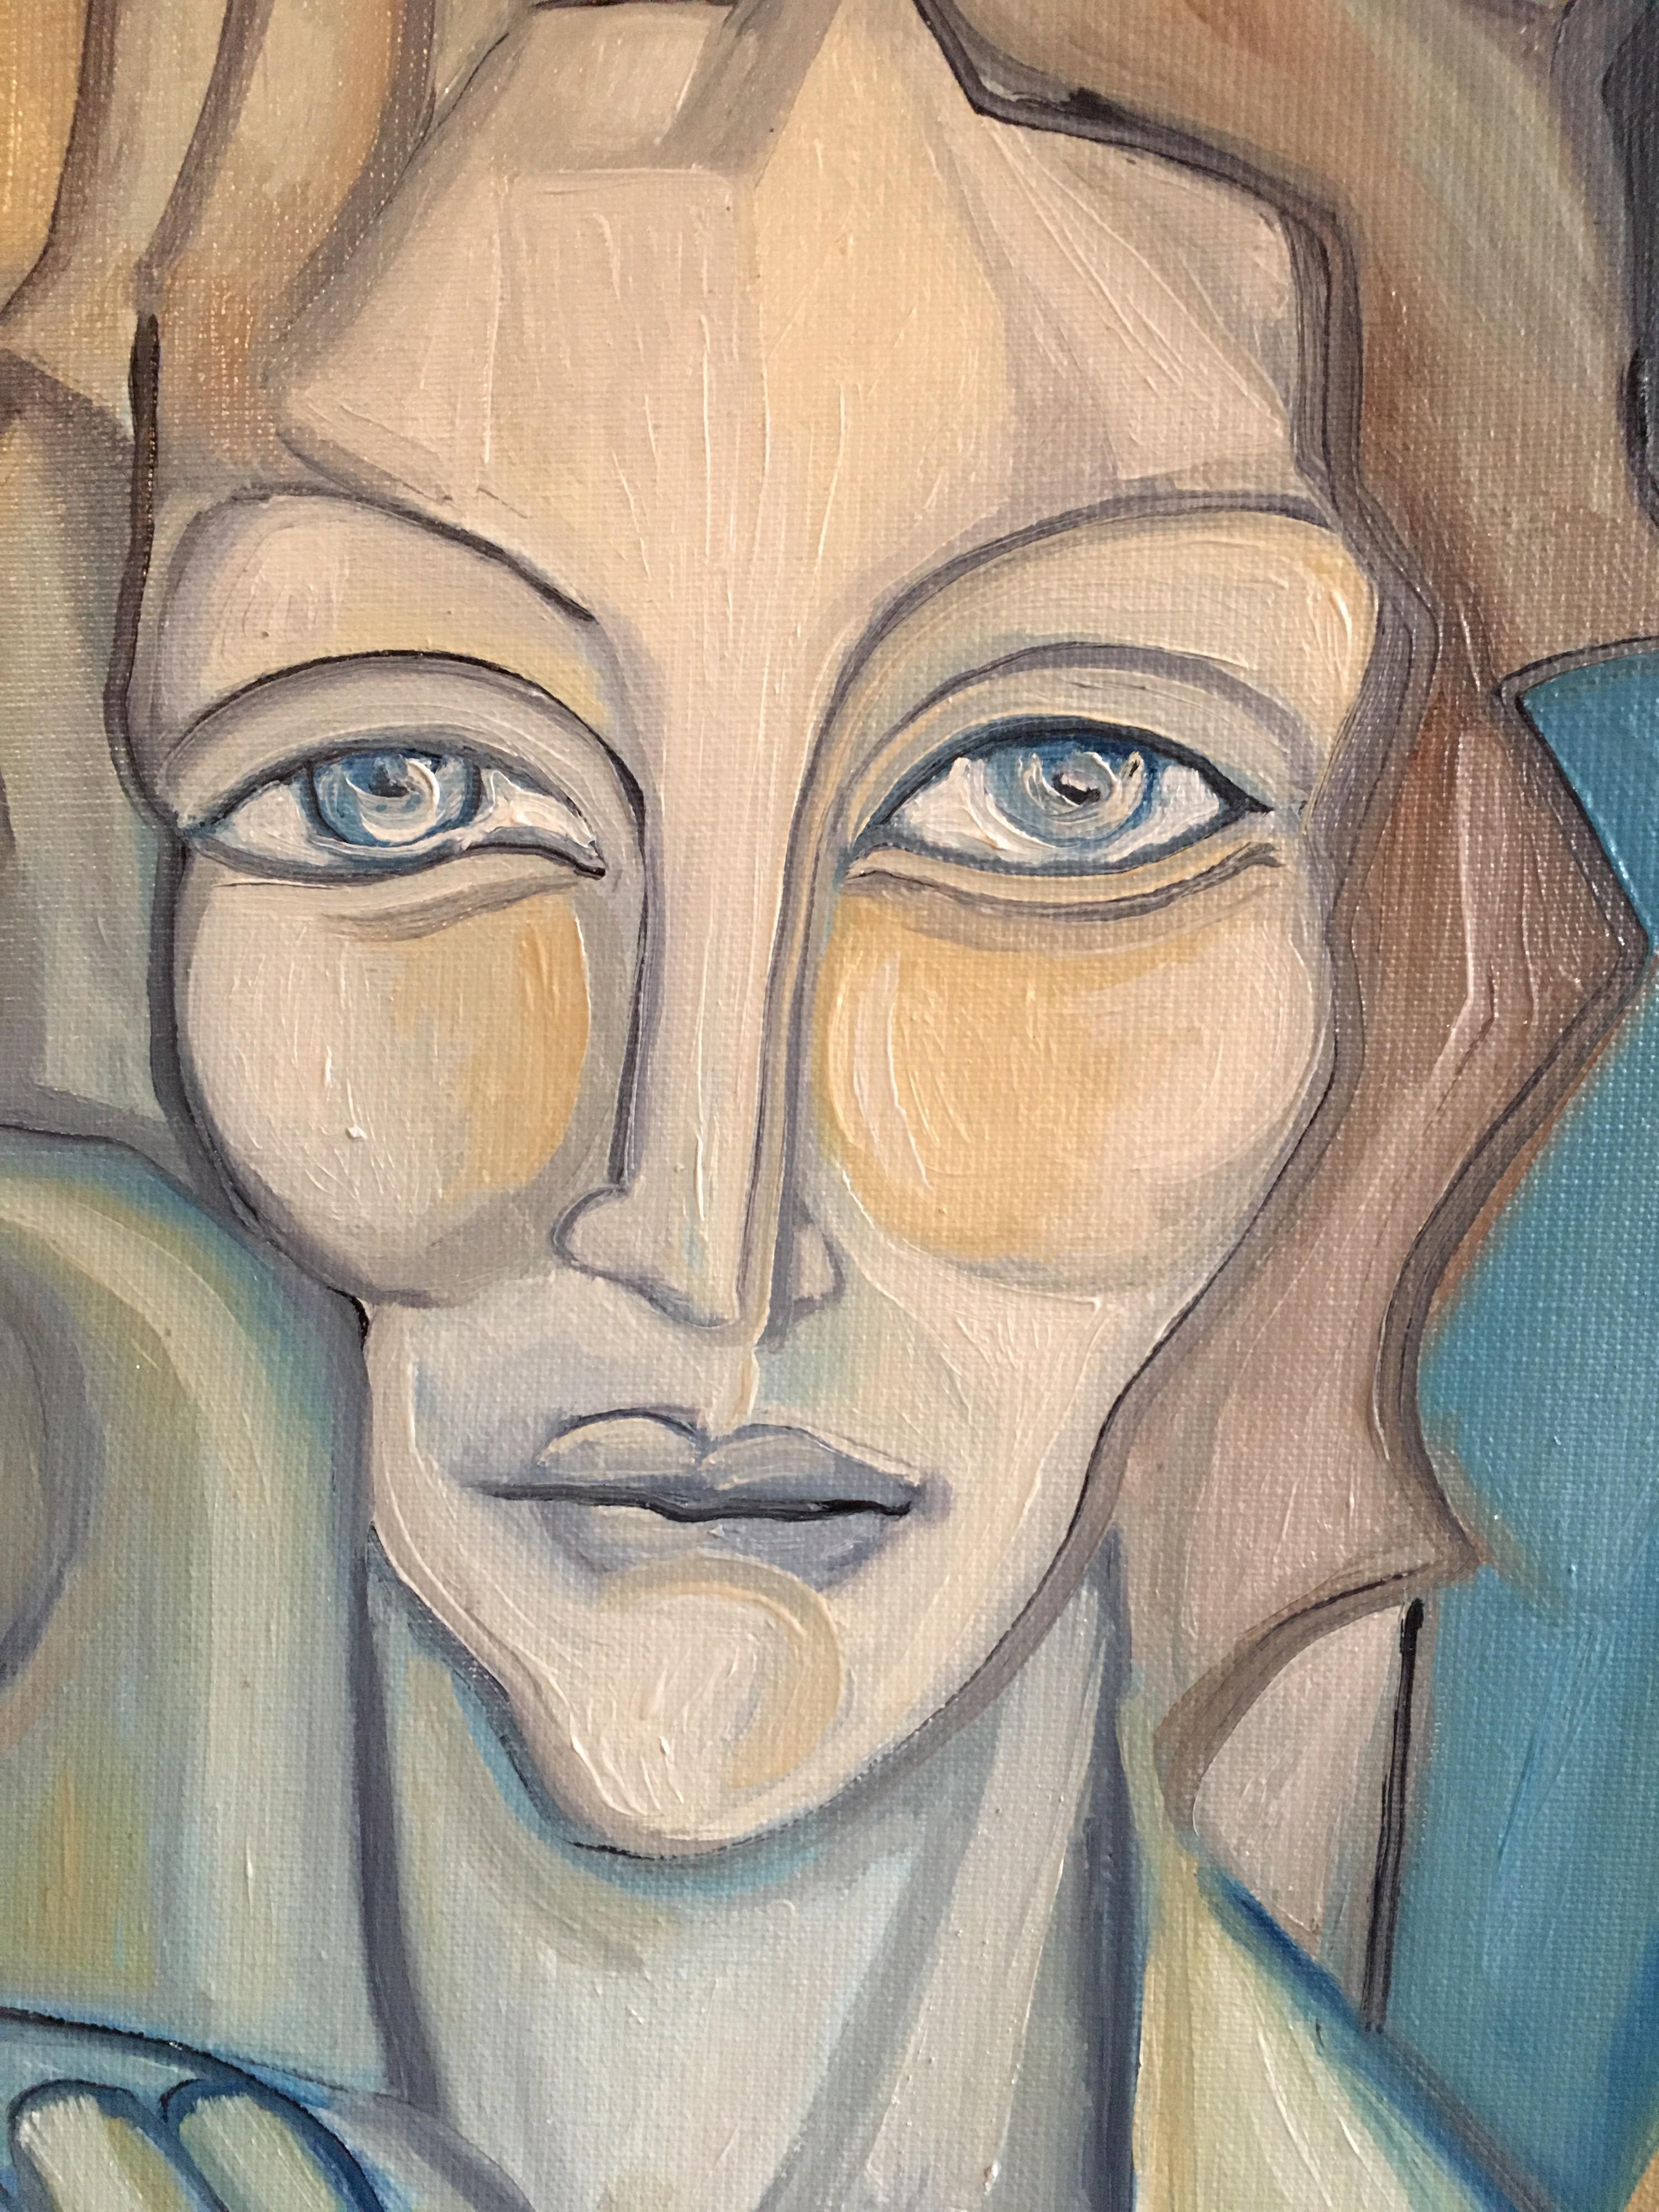 Blue Coloured Portrait, Cubist Abstract, Original Oil Painting, Signed  - Brown Abstract Painting by Beatrice Werlie